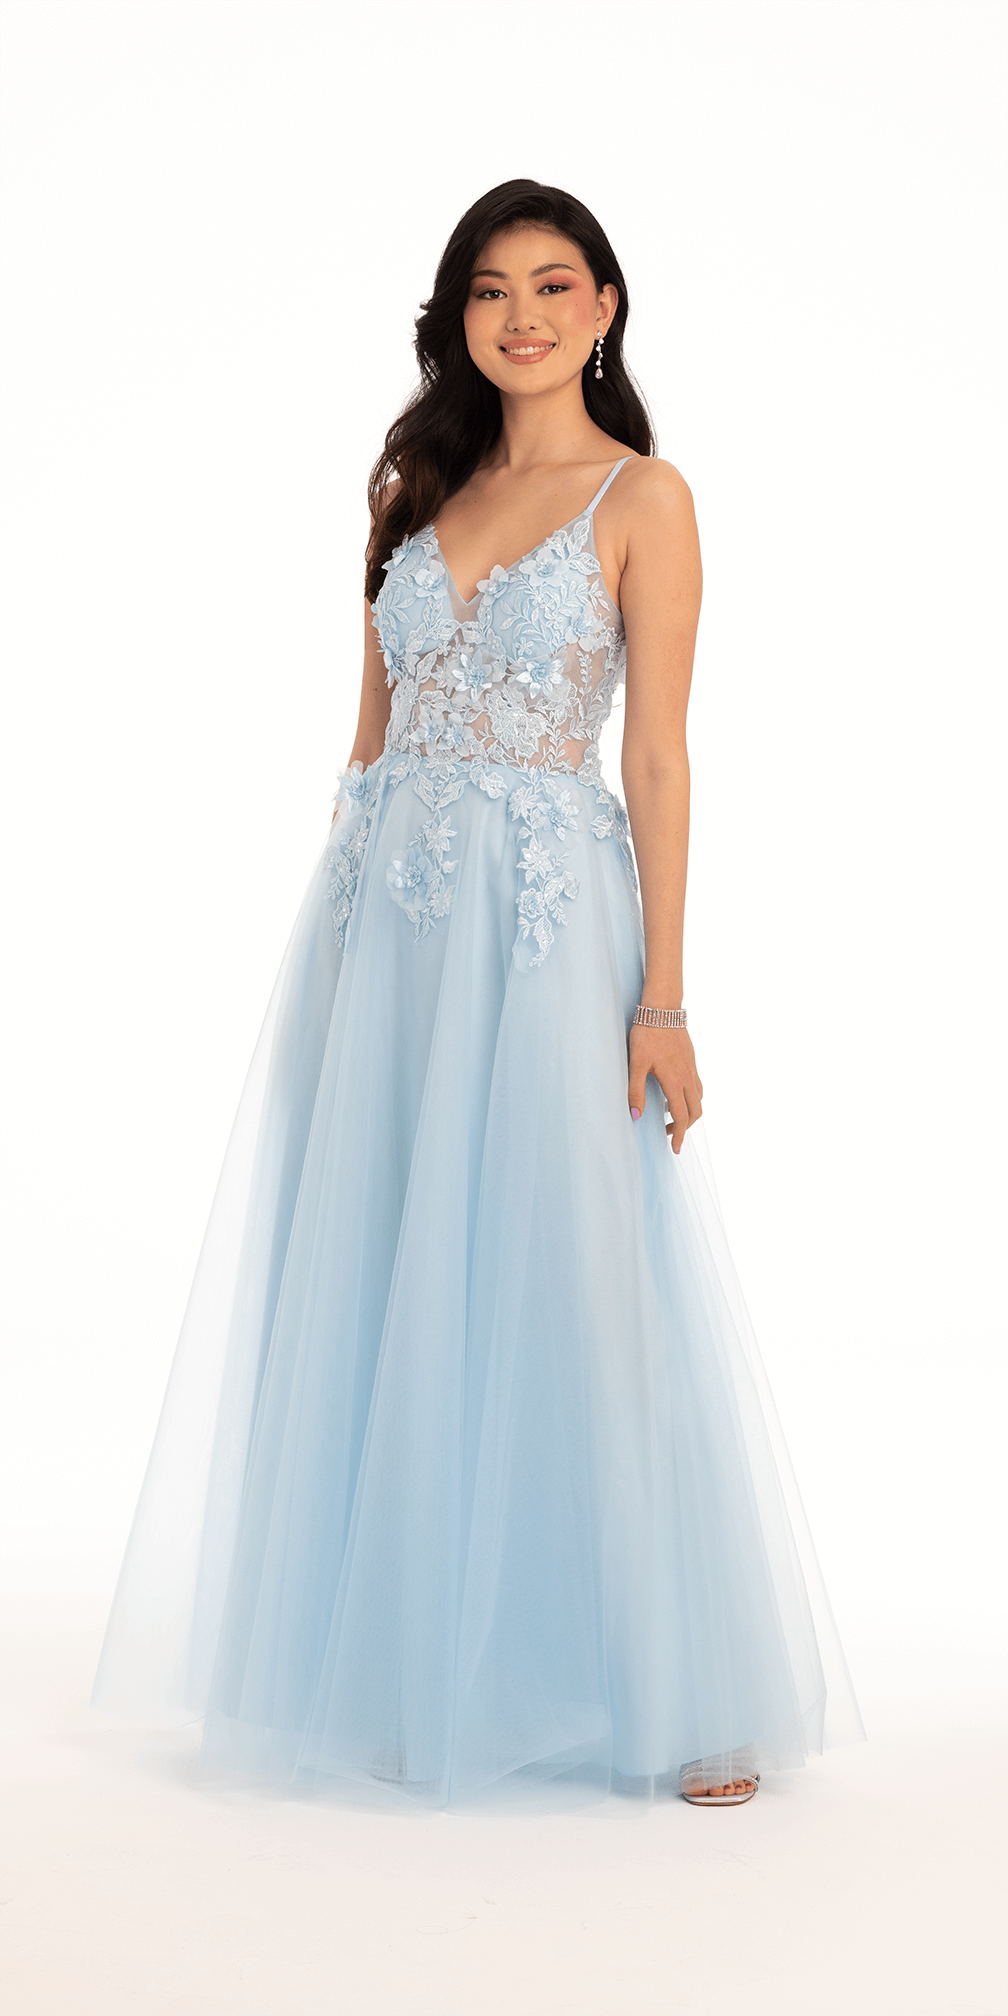 Camille La Vie Floral Embroidered Sweetheart Tulle Ballgown missy / 00 / light-blue